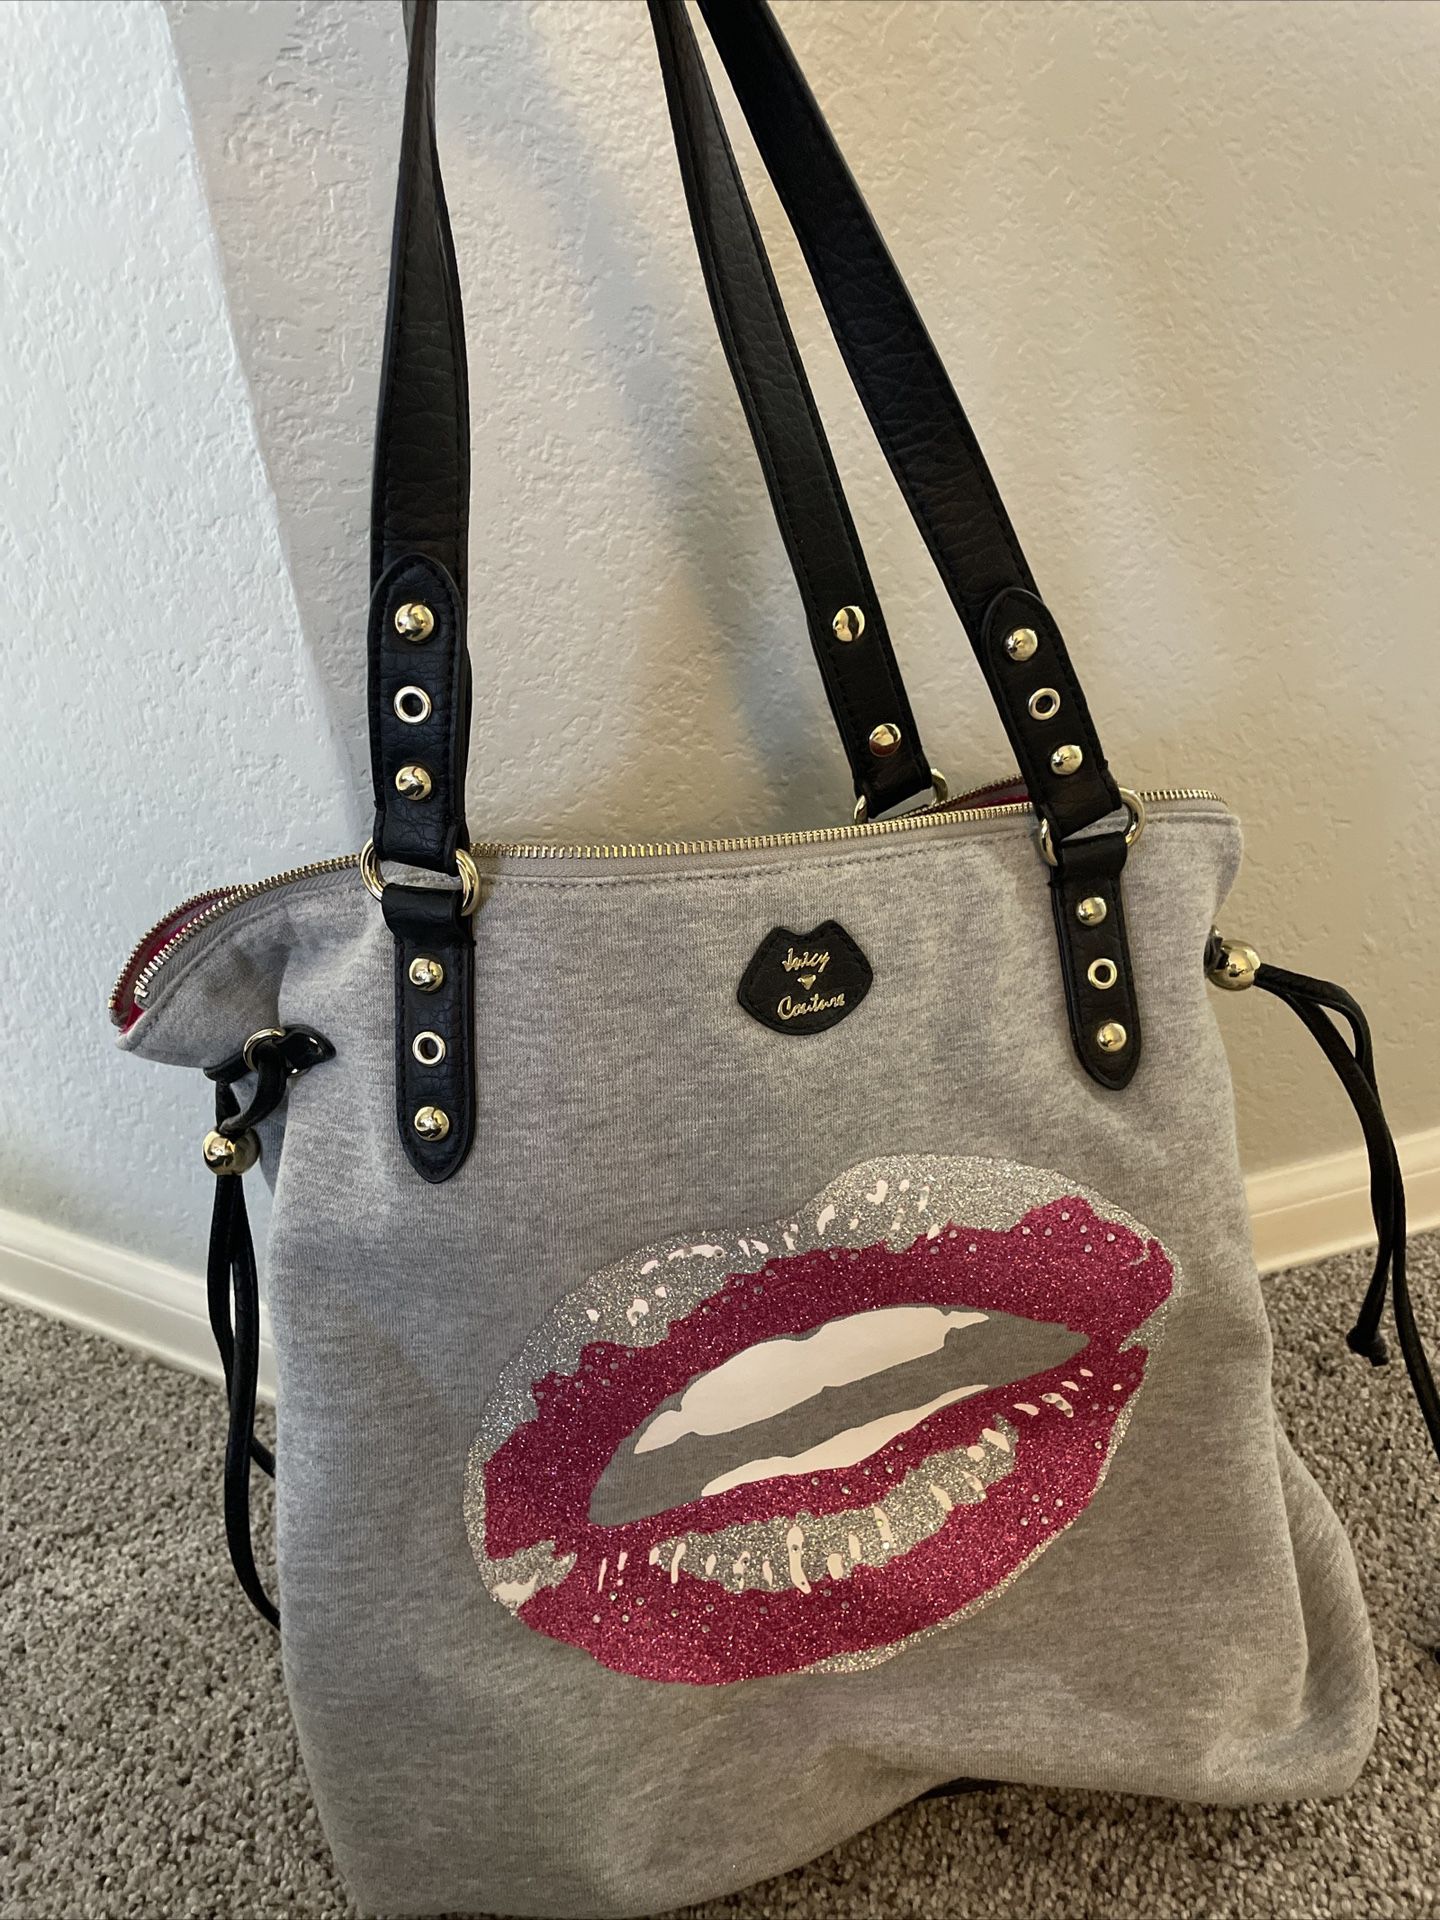 Authentic Juicy Couture Totebag